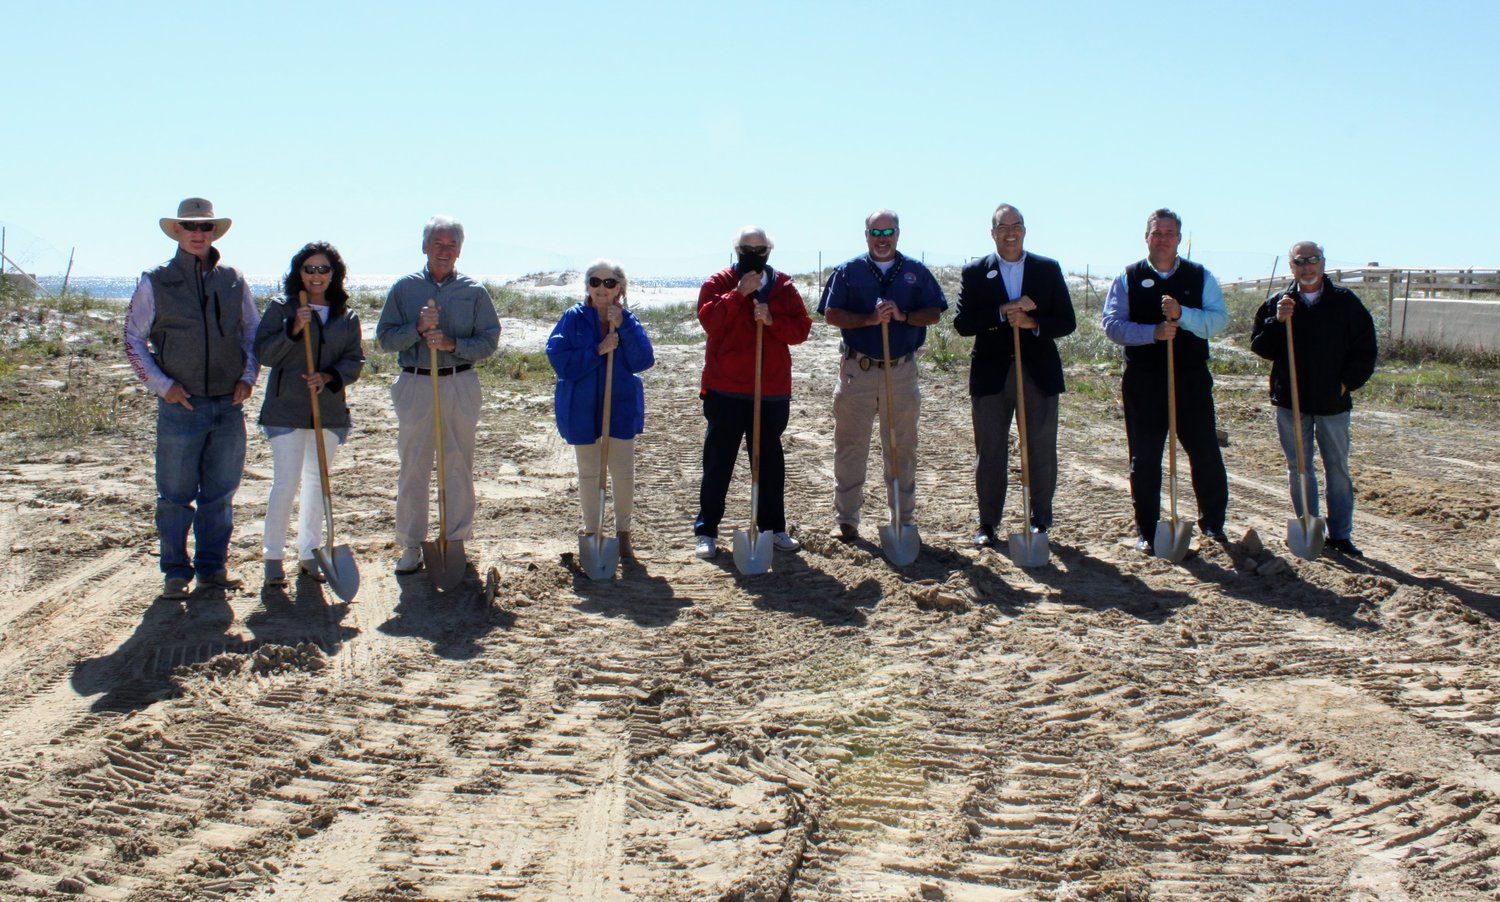 The long-awaited groundbreaking for Perdido Dunes Tower took place Nov. 2.